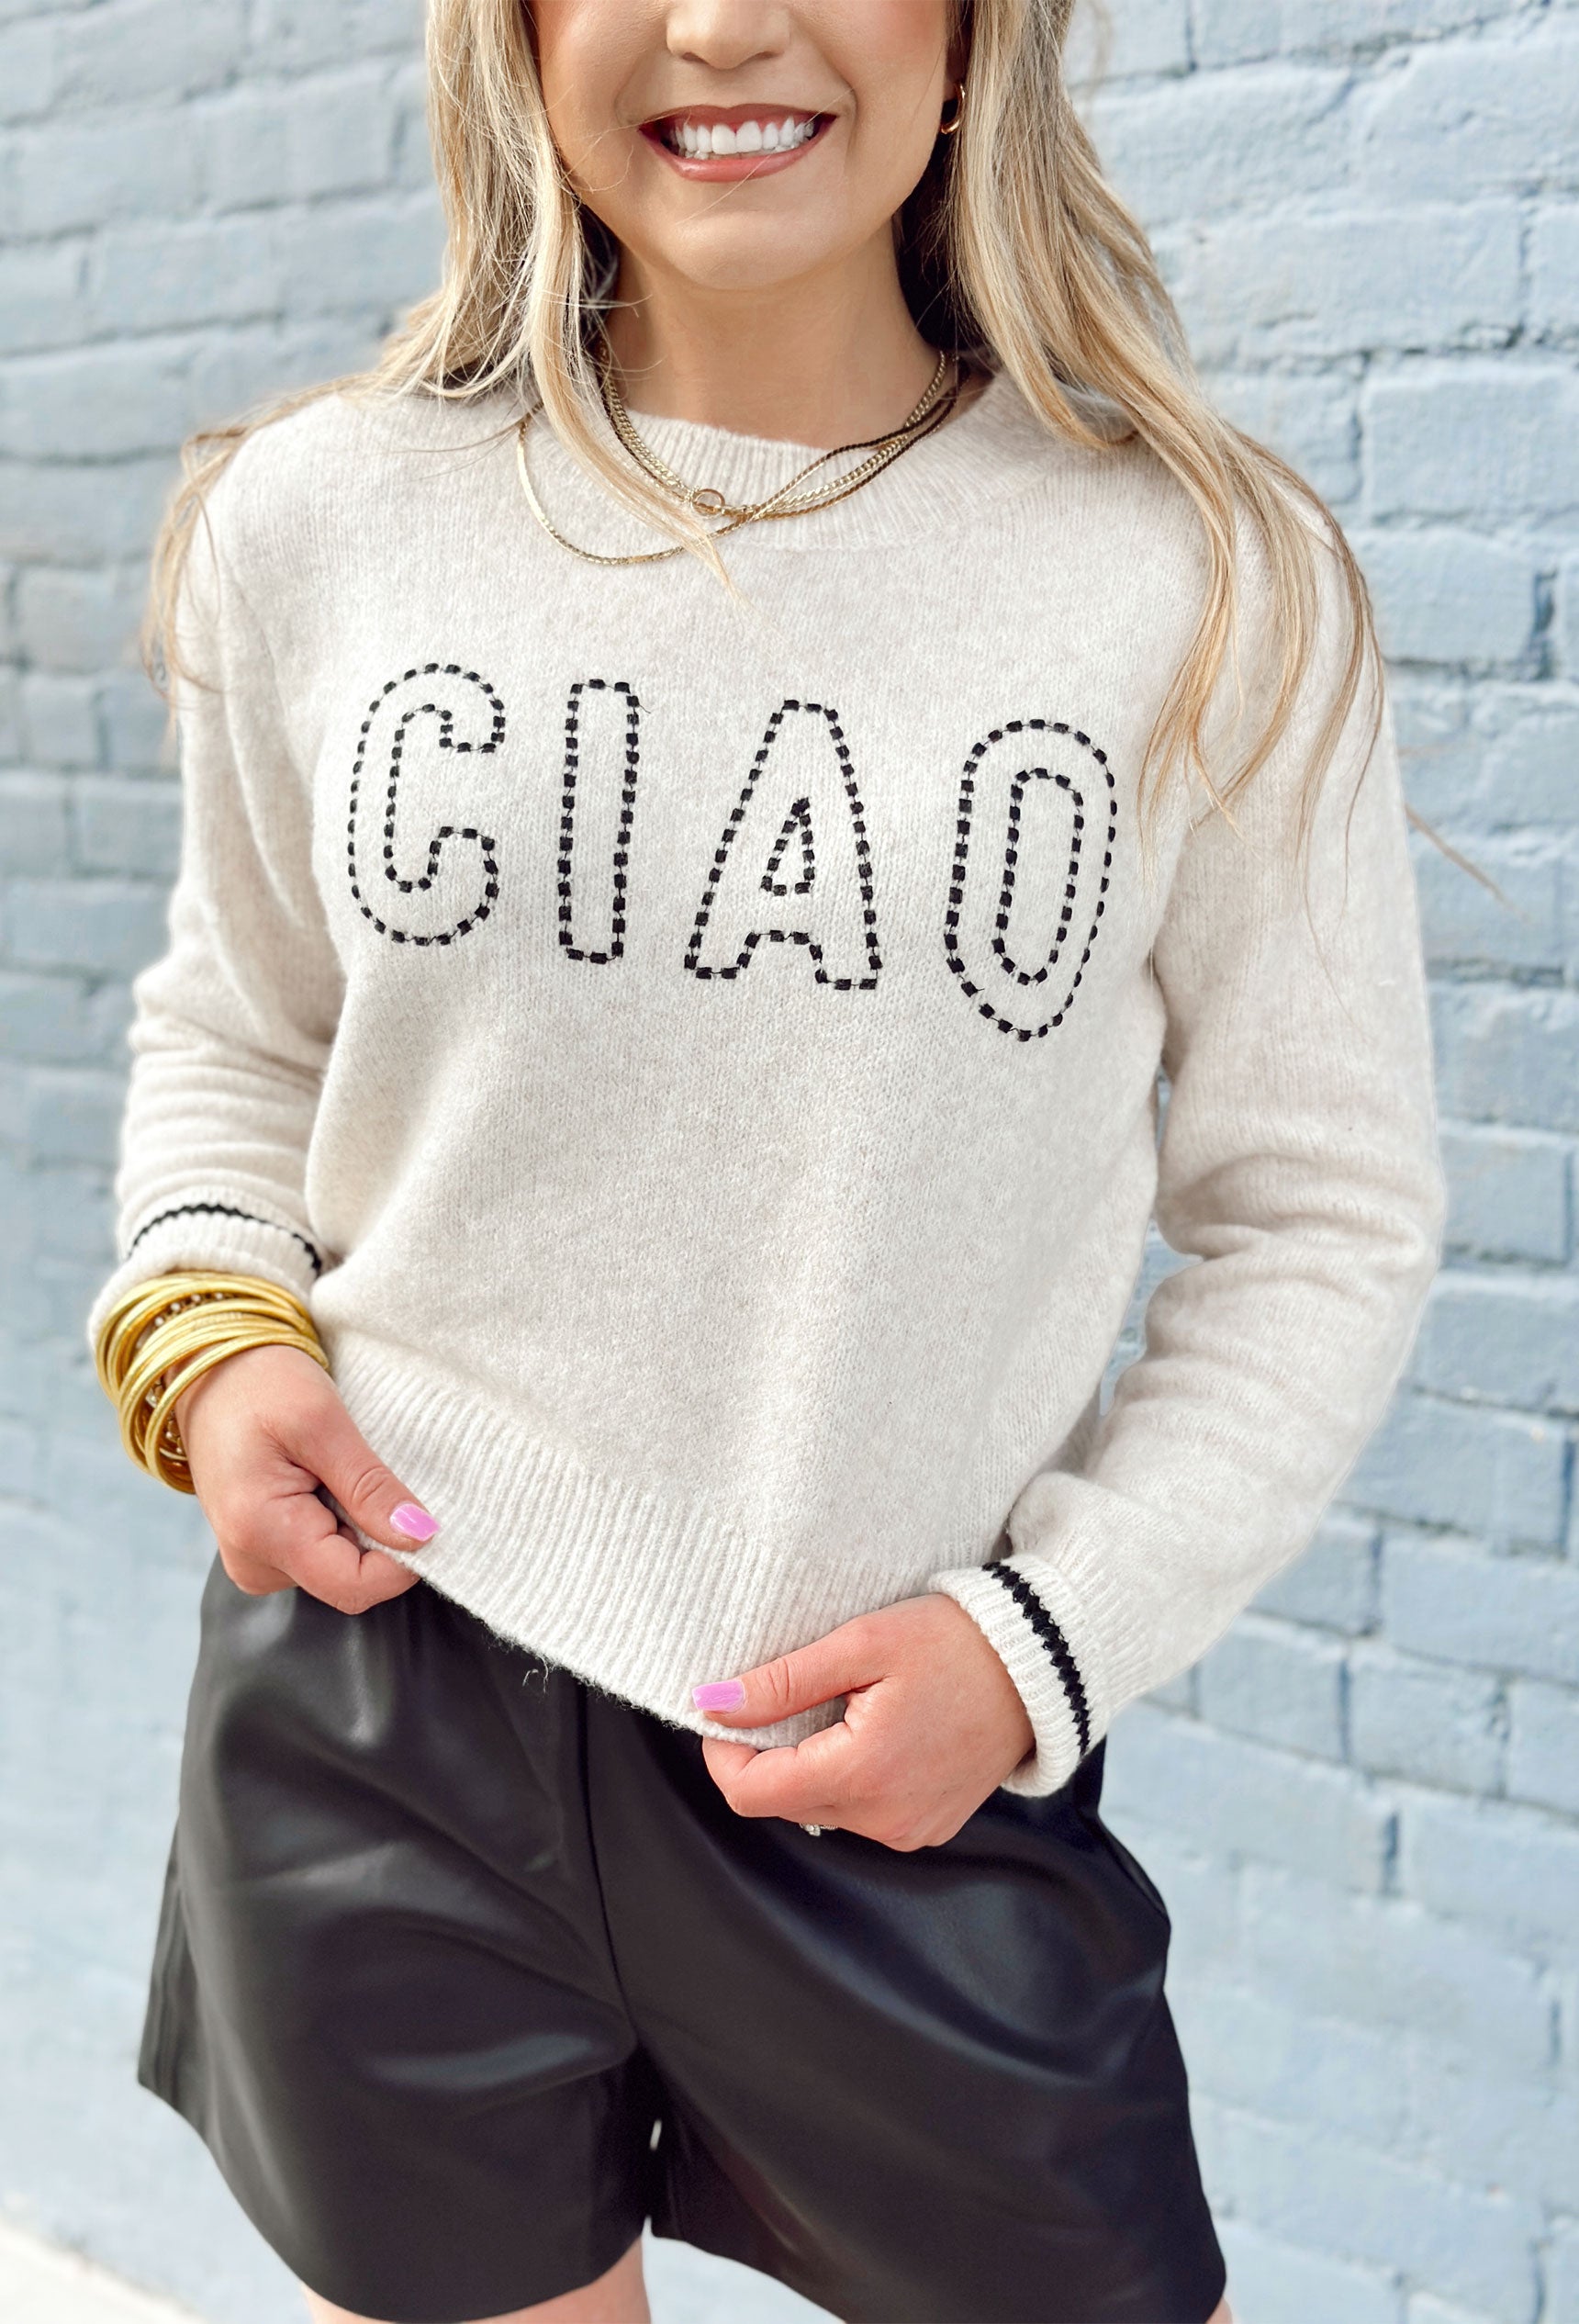 Z SUPPLY Milan Ciao Sweater, heathered cream sweater with stitched phrase "ciao" in black on the chest